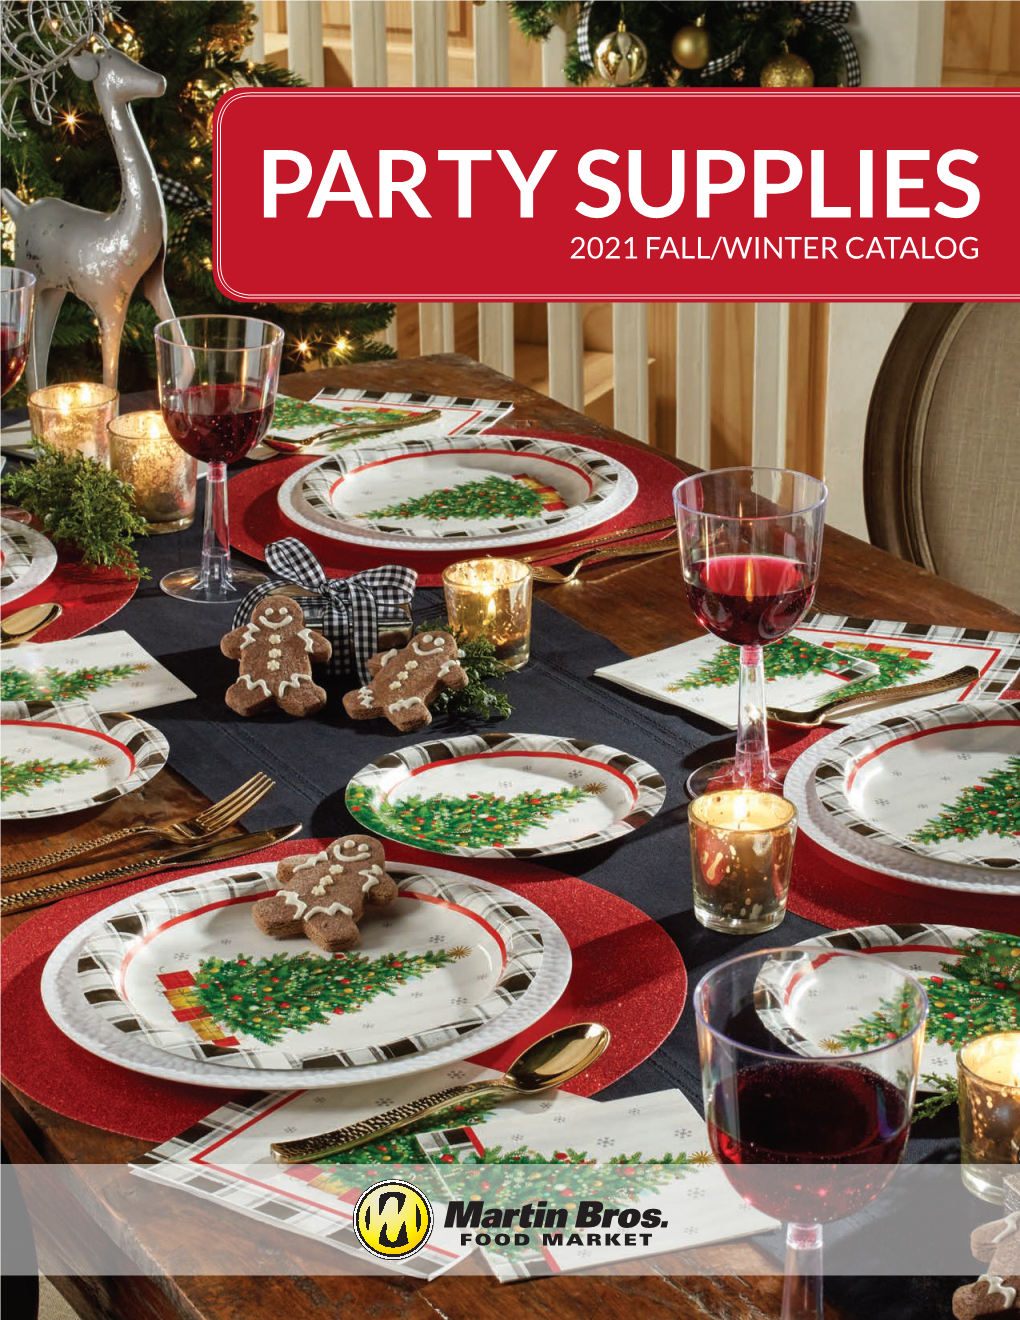 PARTY SUPPLIES 2021 FALL/WINTER CATALOG Any Items Ordered Online with Your Regular Order Will Not Be Delivered